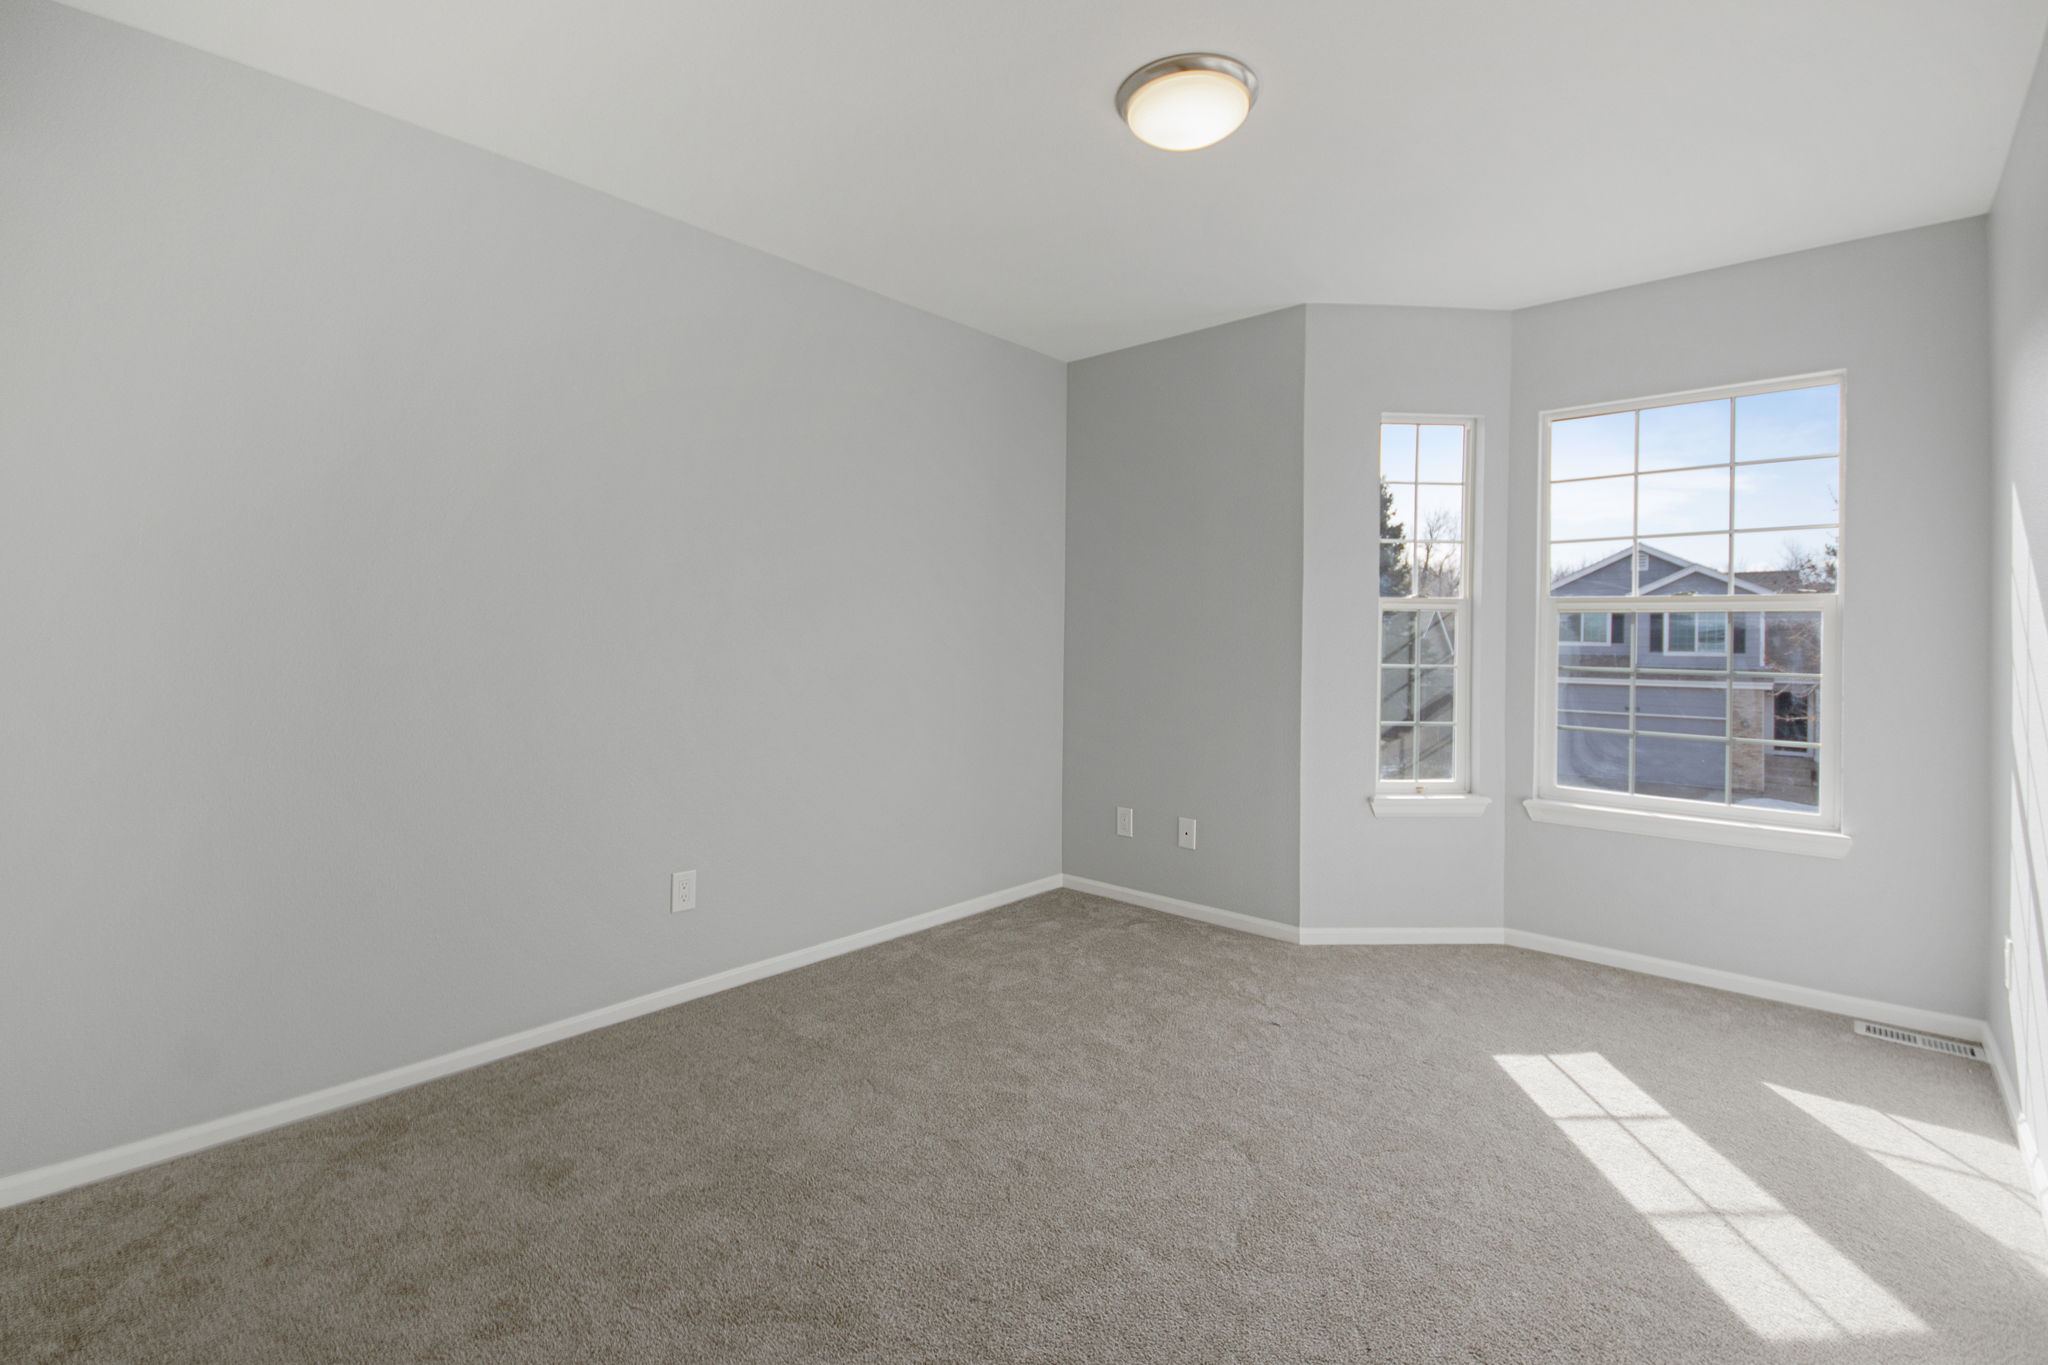  9486 High Cliffe St, Highlands Ranch, CO 80129, US Photo 22